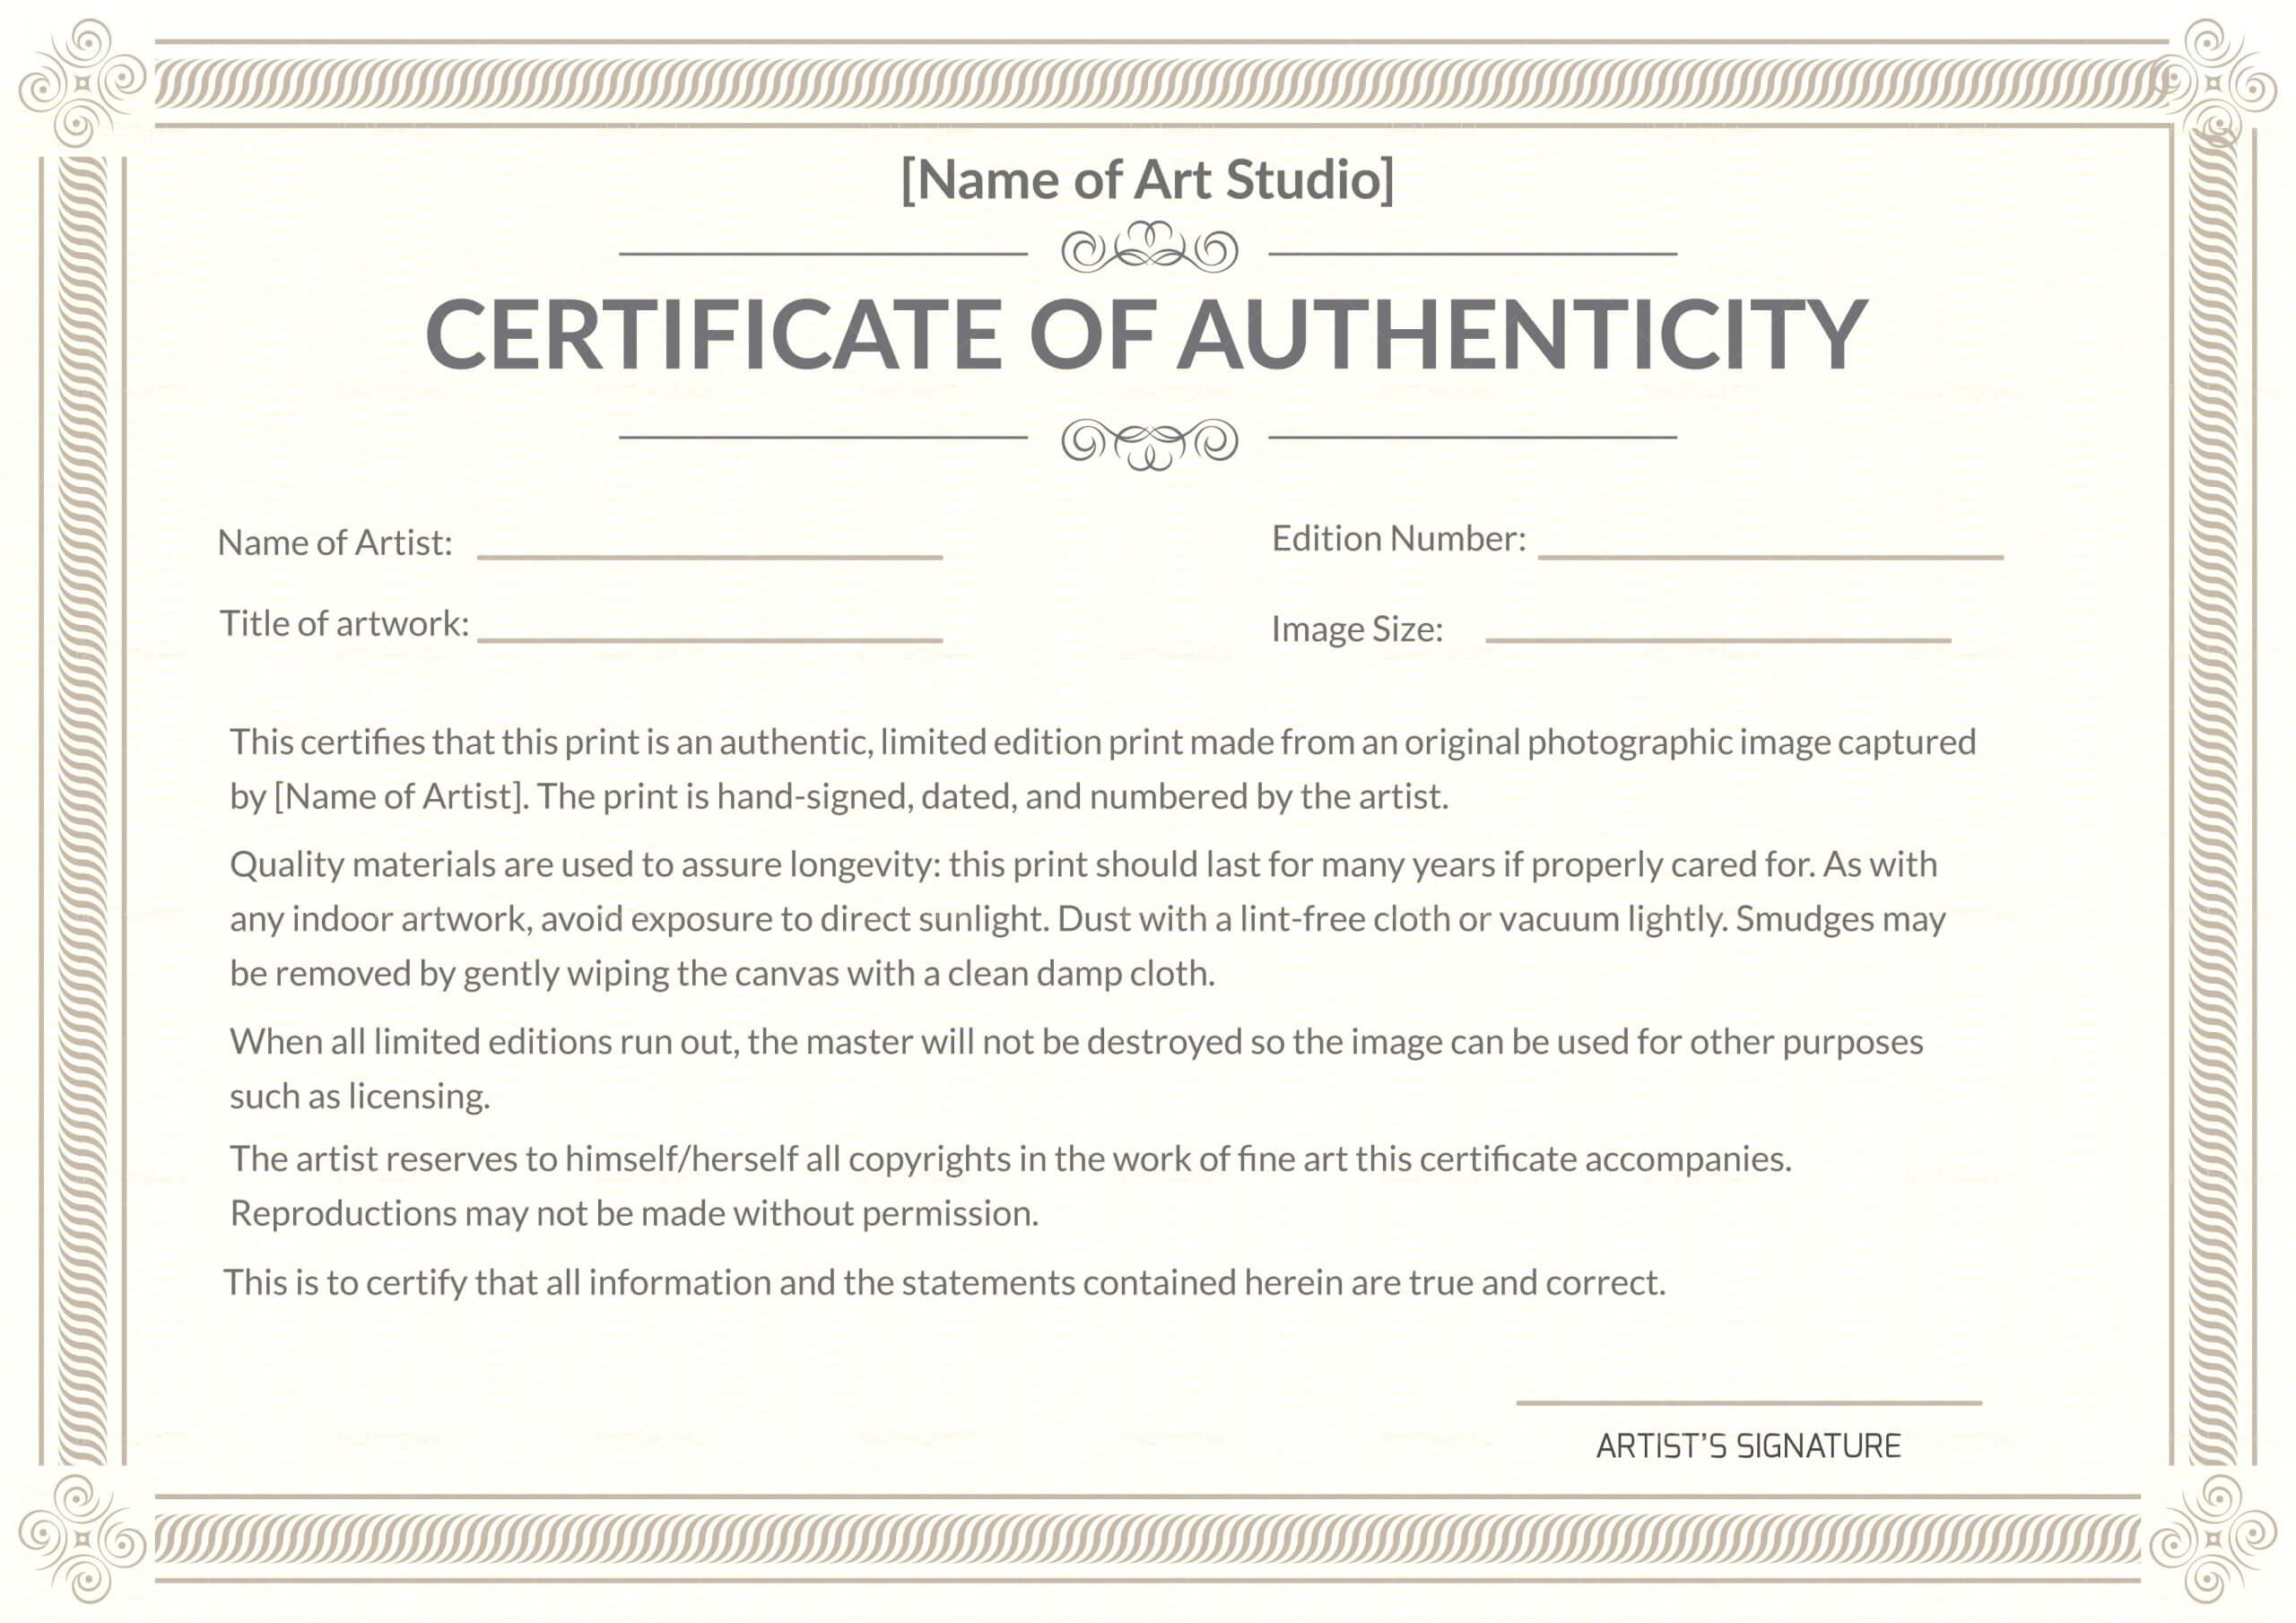 Certificate Of Authenticity Template Physician Written With Photography Certificate Of Authenticity Template